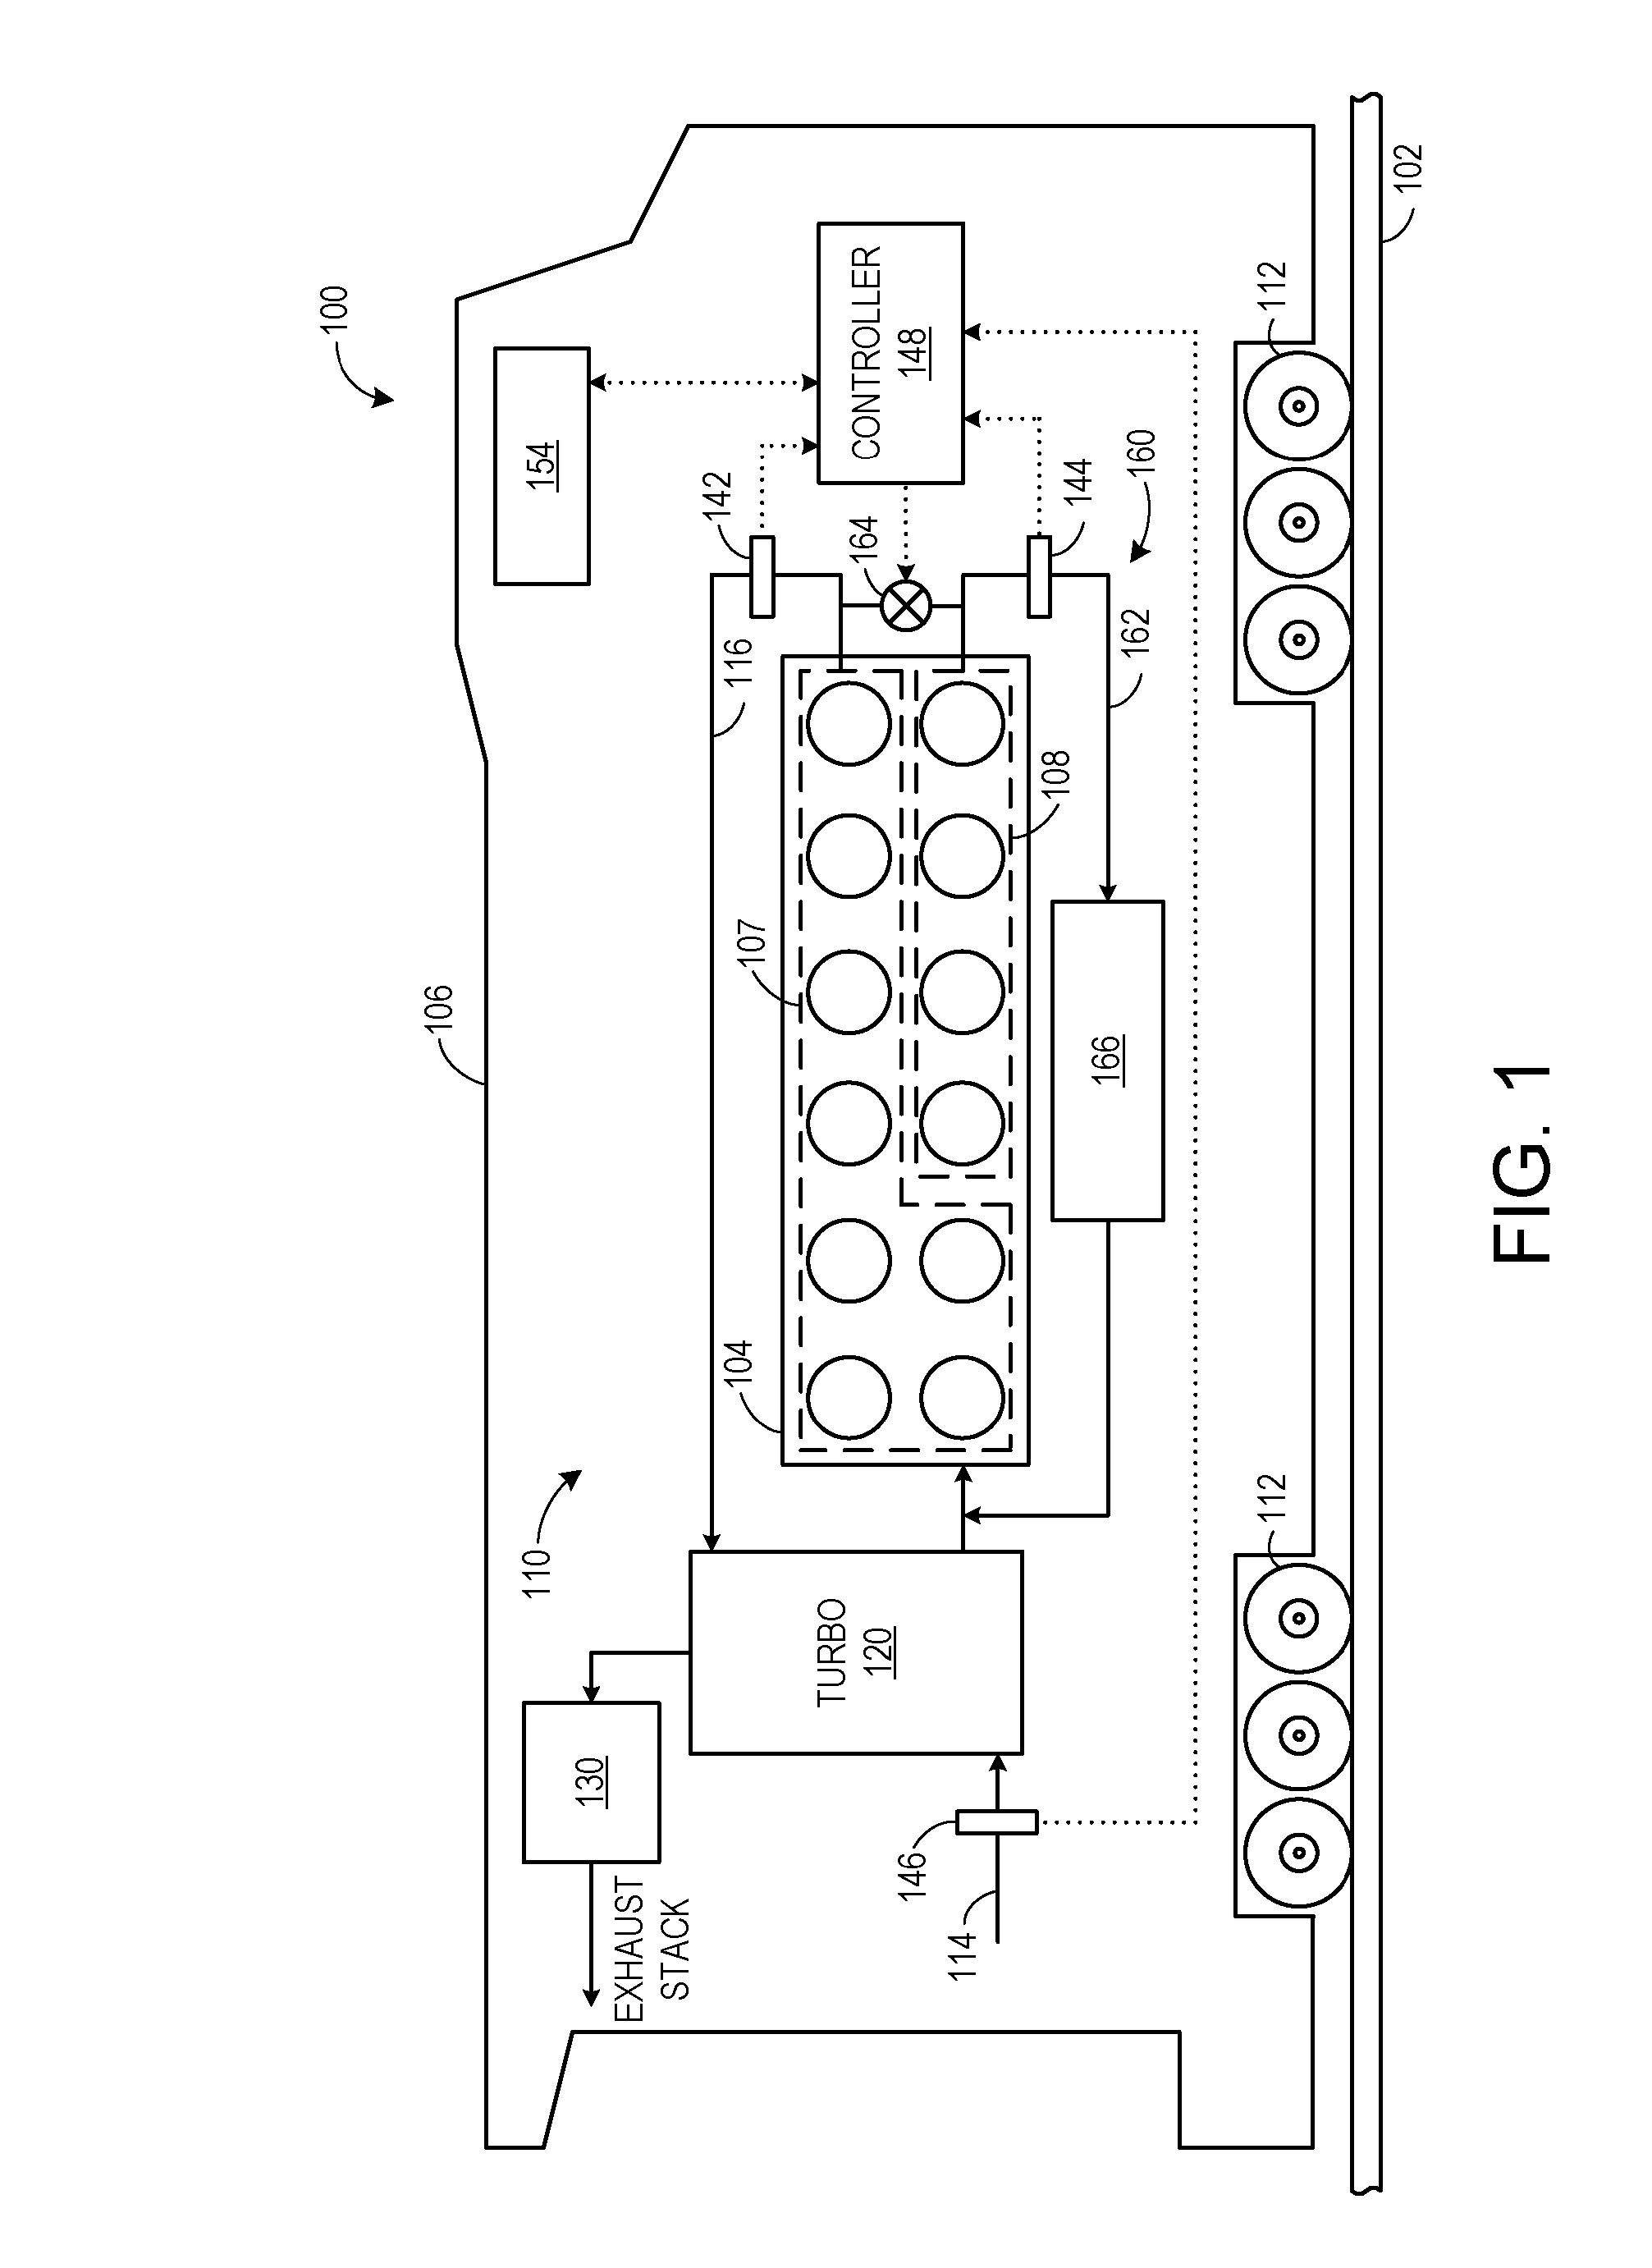 Method and system for controlling an engine during tunneling operation